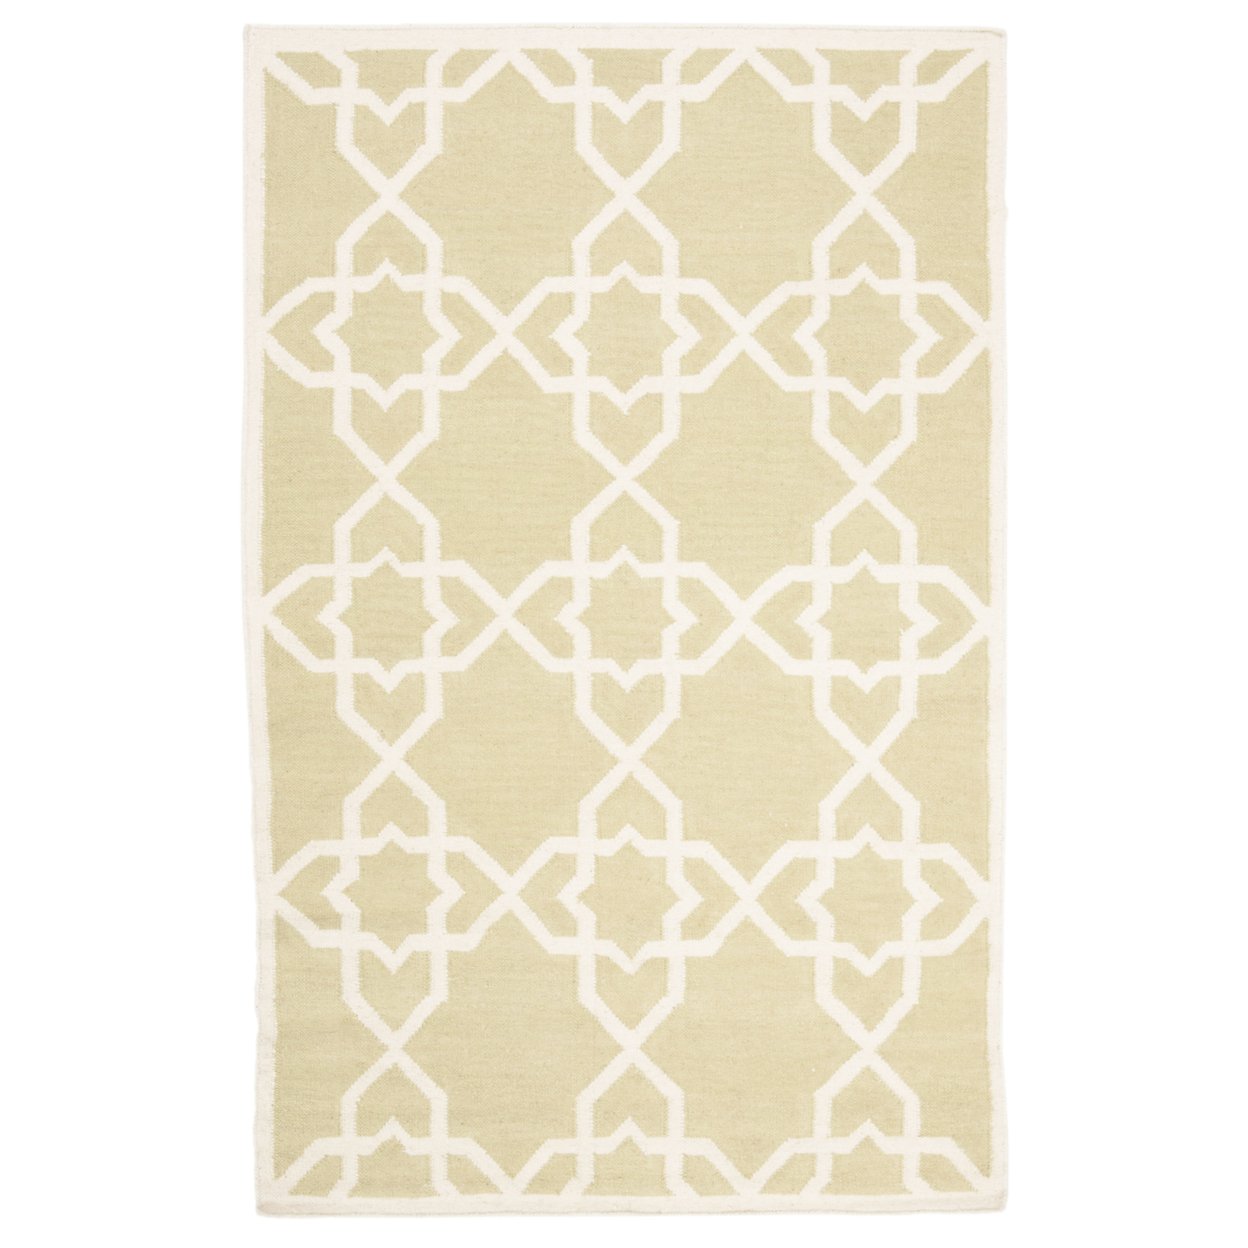 SAFAVIEH Dhurries DHU548A Handwoven Olive / Ivory Rug - 5' X 8'